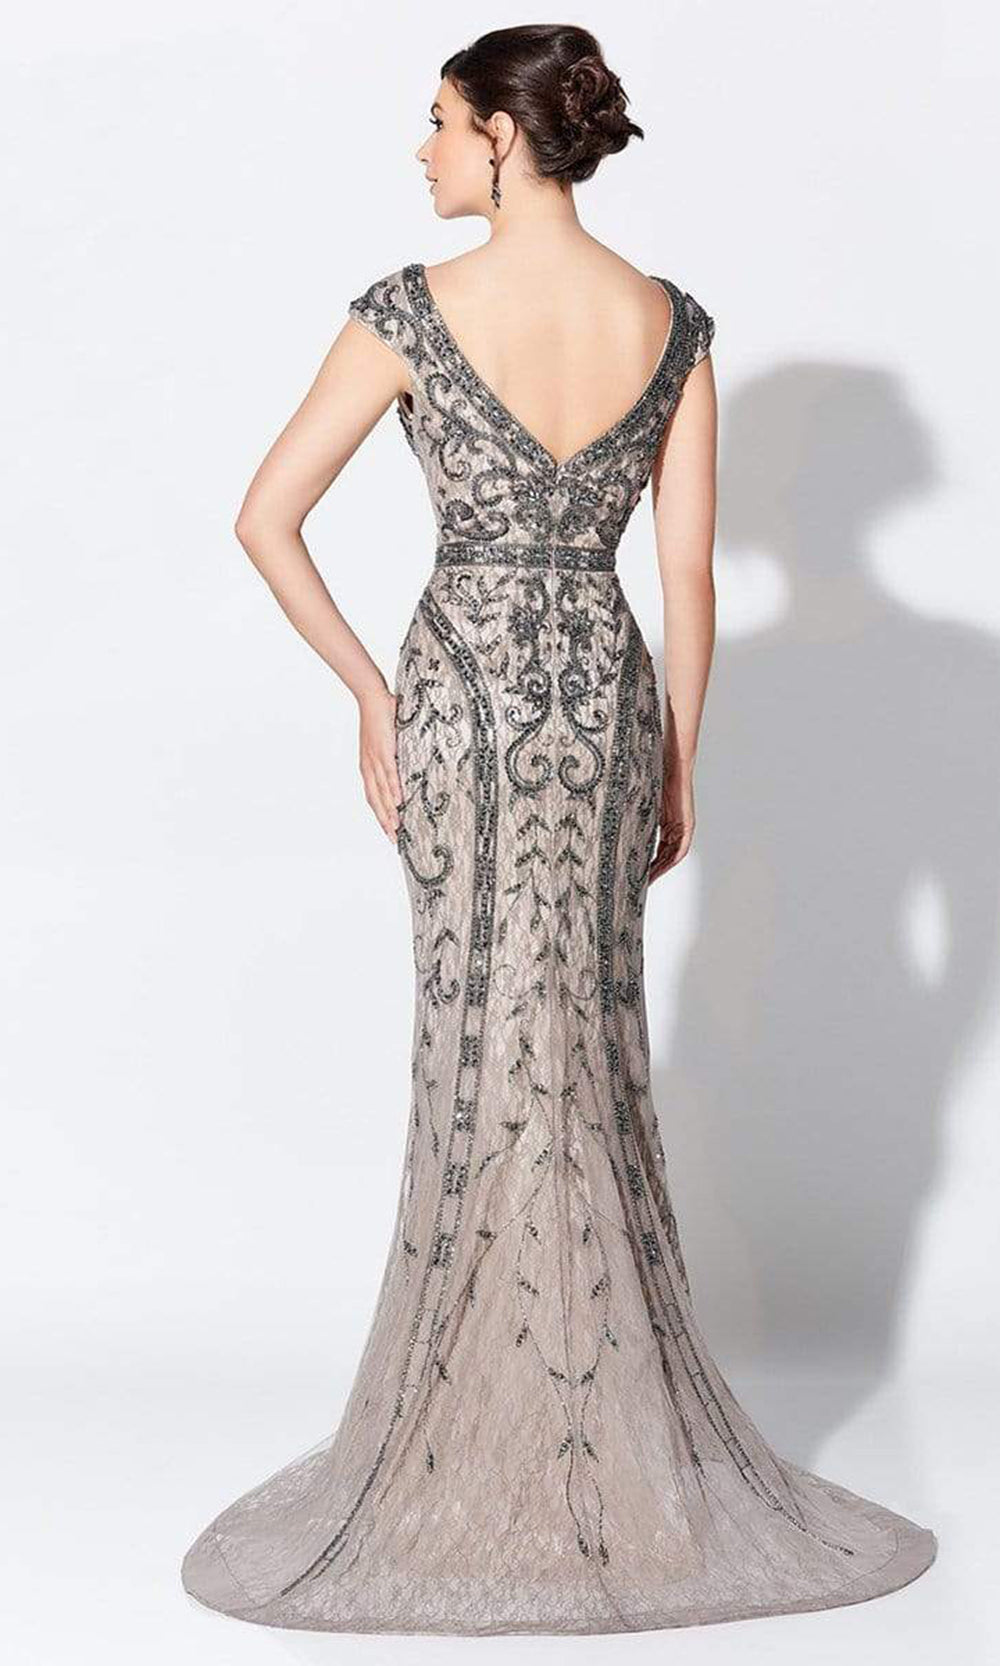 Ivonne D for Mon Cheri - Bead Embellished V-Neck Sheath Evening Dress 119D42 - 1 pc Smoke/Nude In Size 6 Available CCSALE 14 / Smoke/Nude